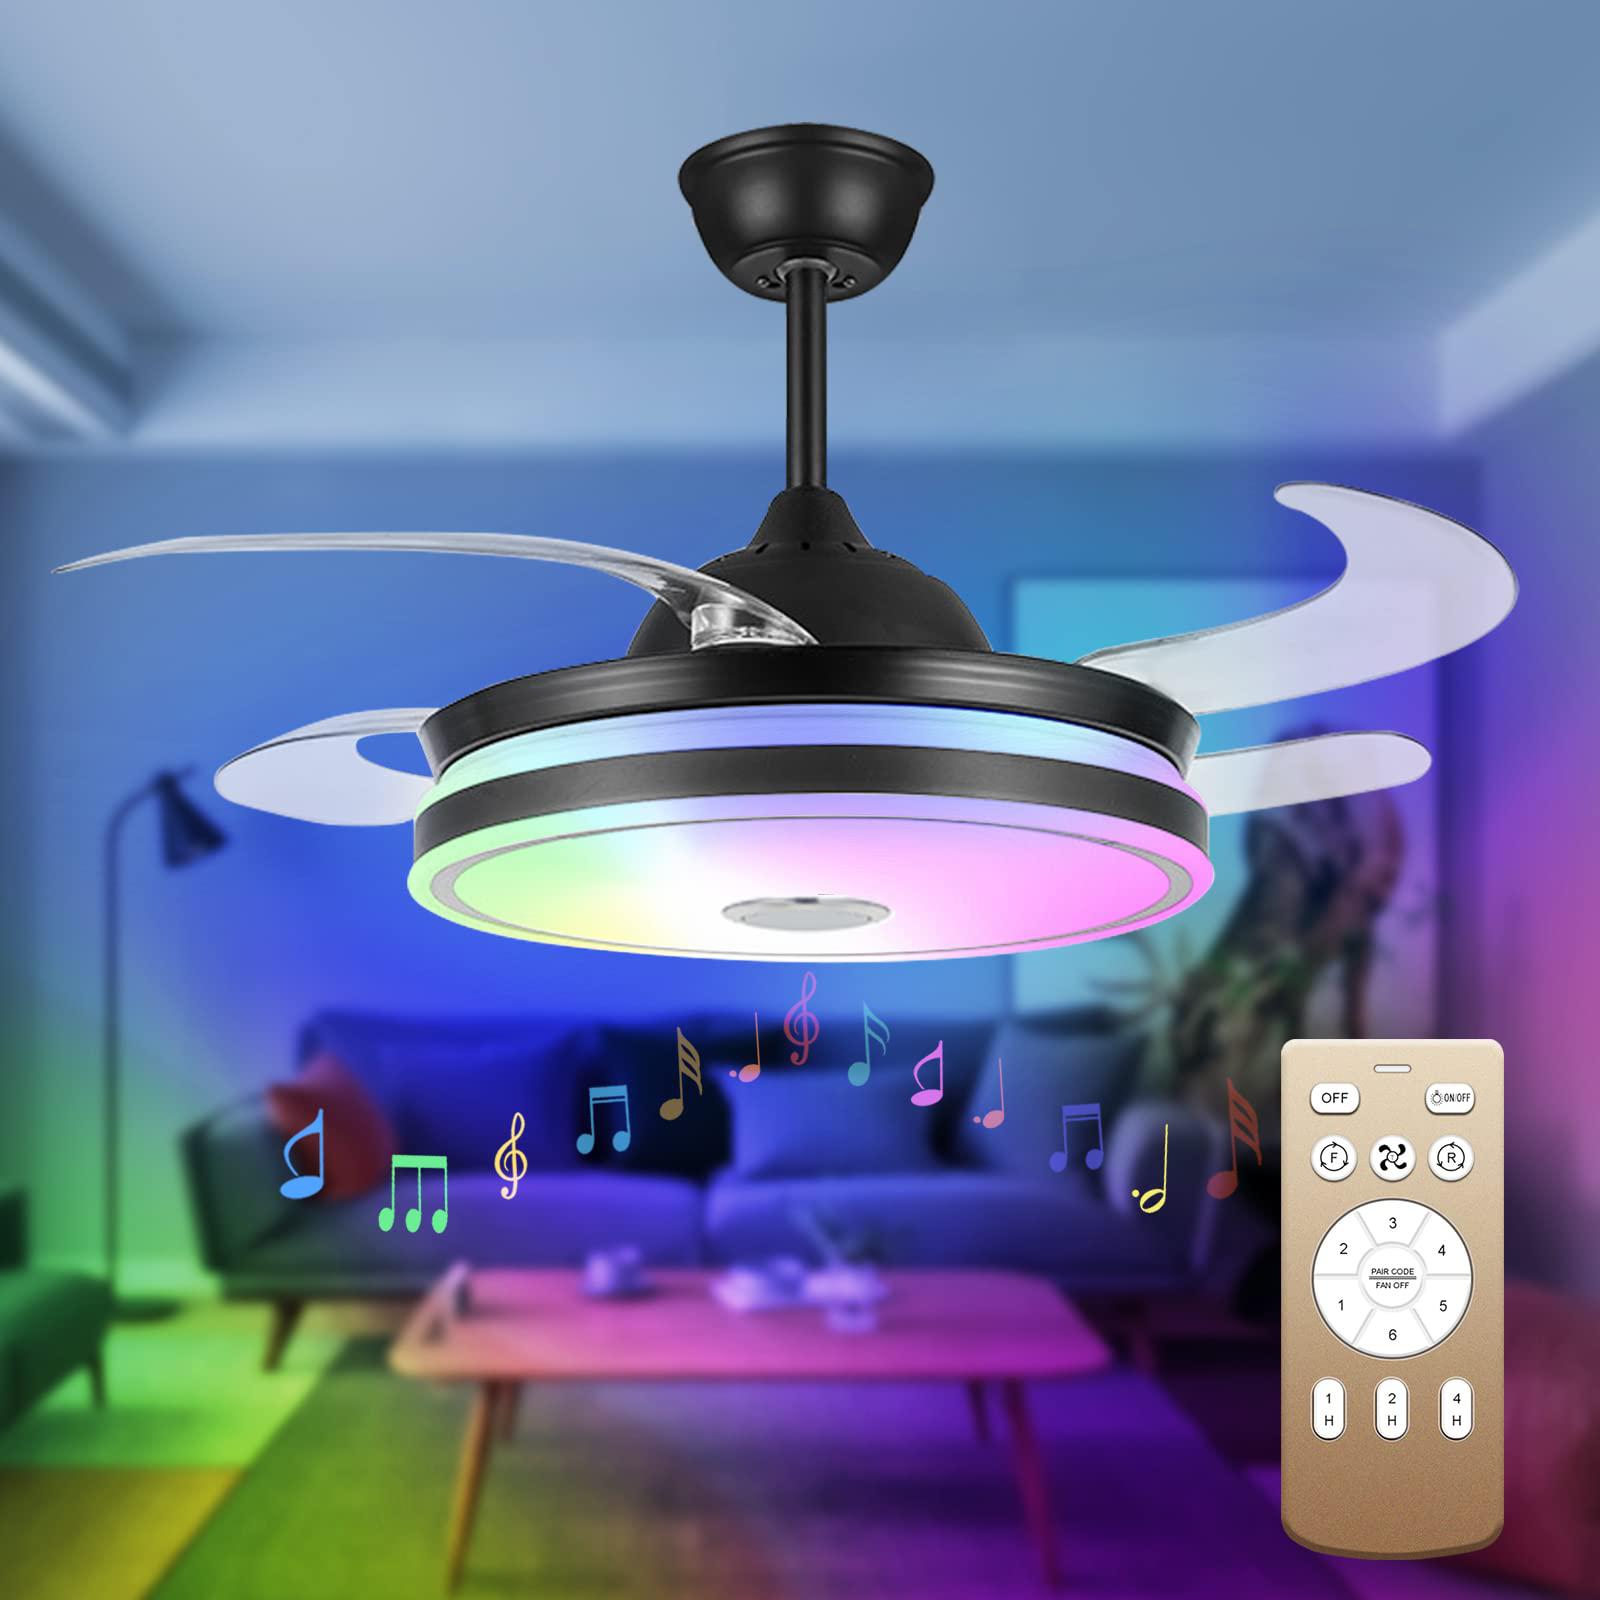 Minfeng led ceiling fan light 42 inch colorful light with remote control,nordic modern style for living rooms,restaurants,bedrooms,6 